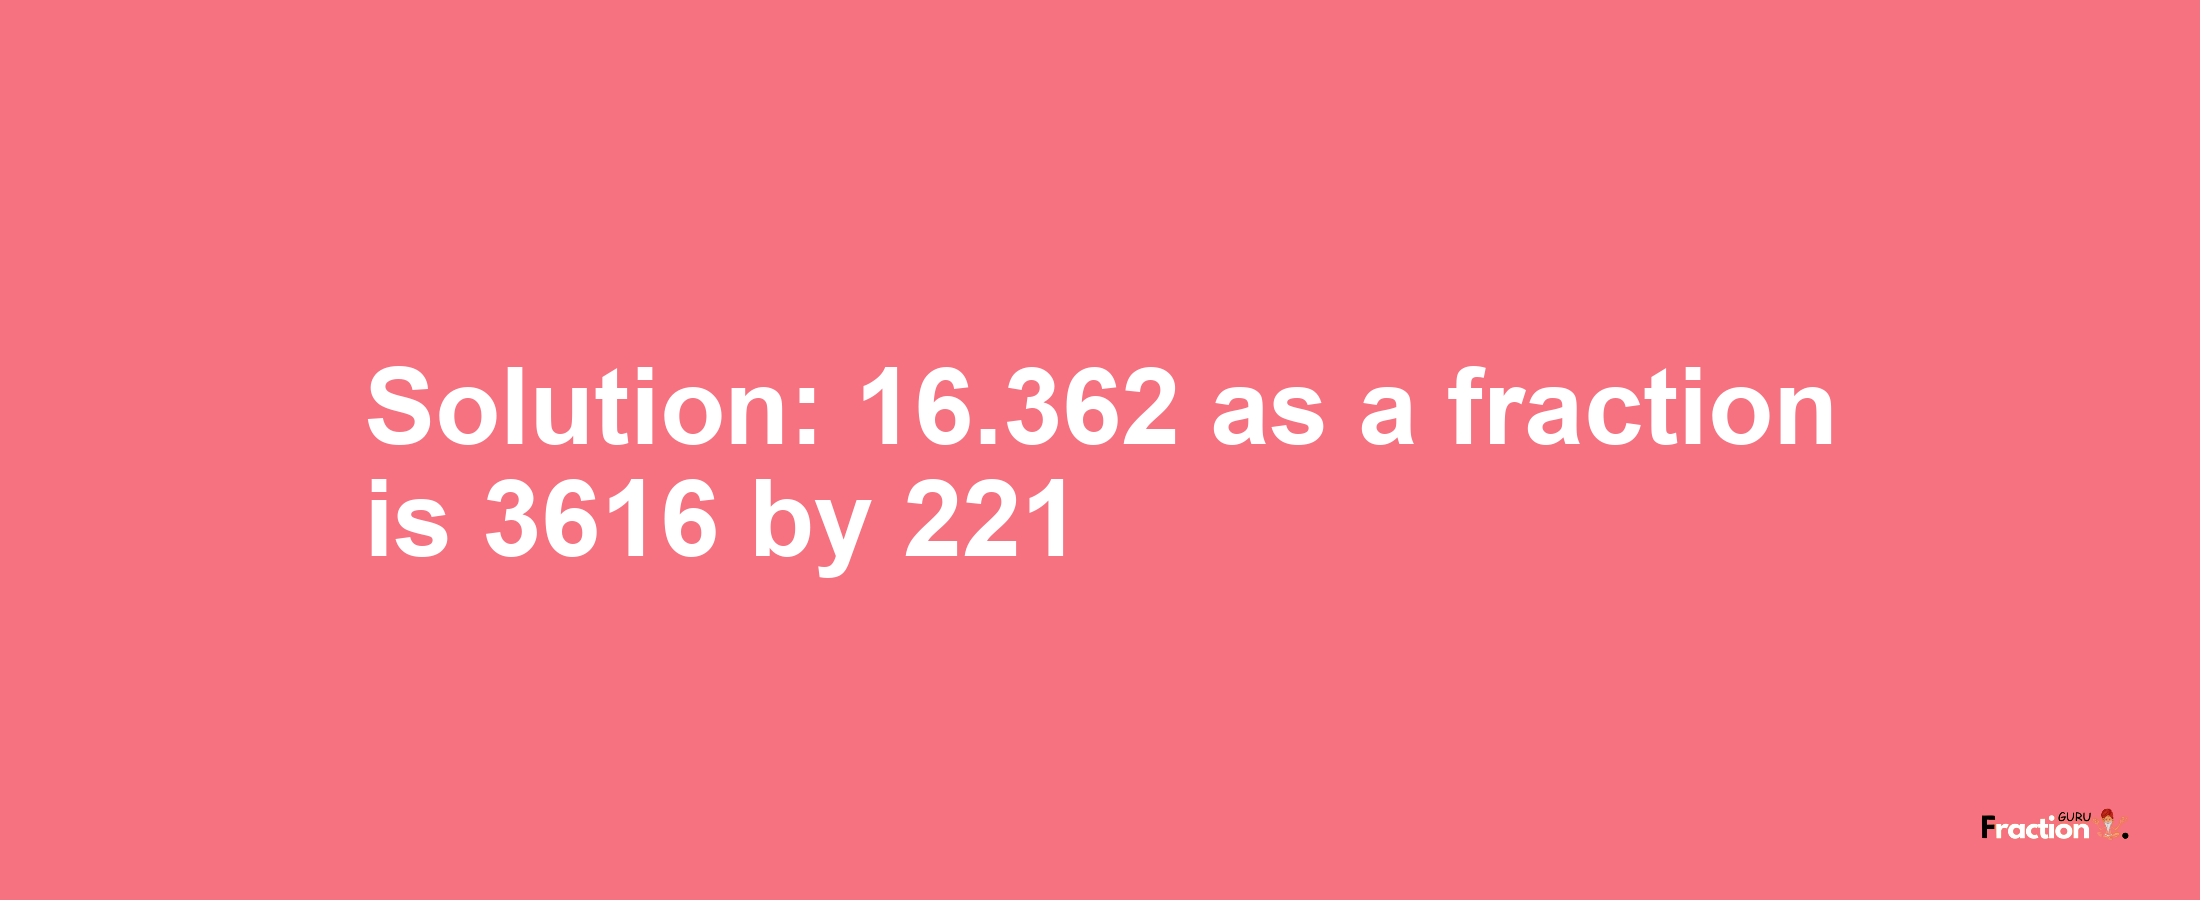 Solution:16.362 as a fraction is 3616/221